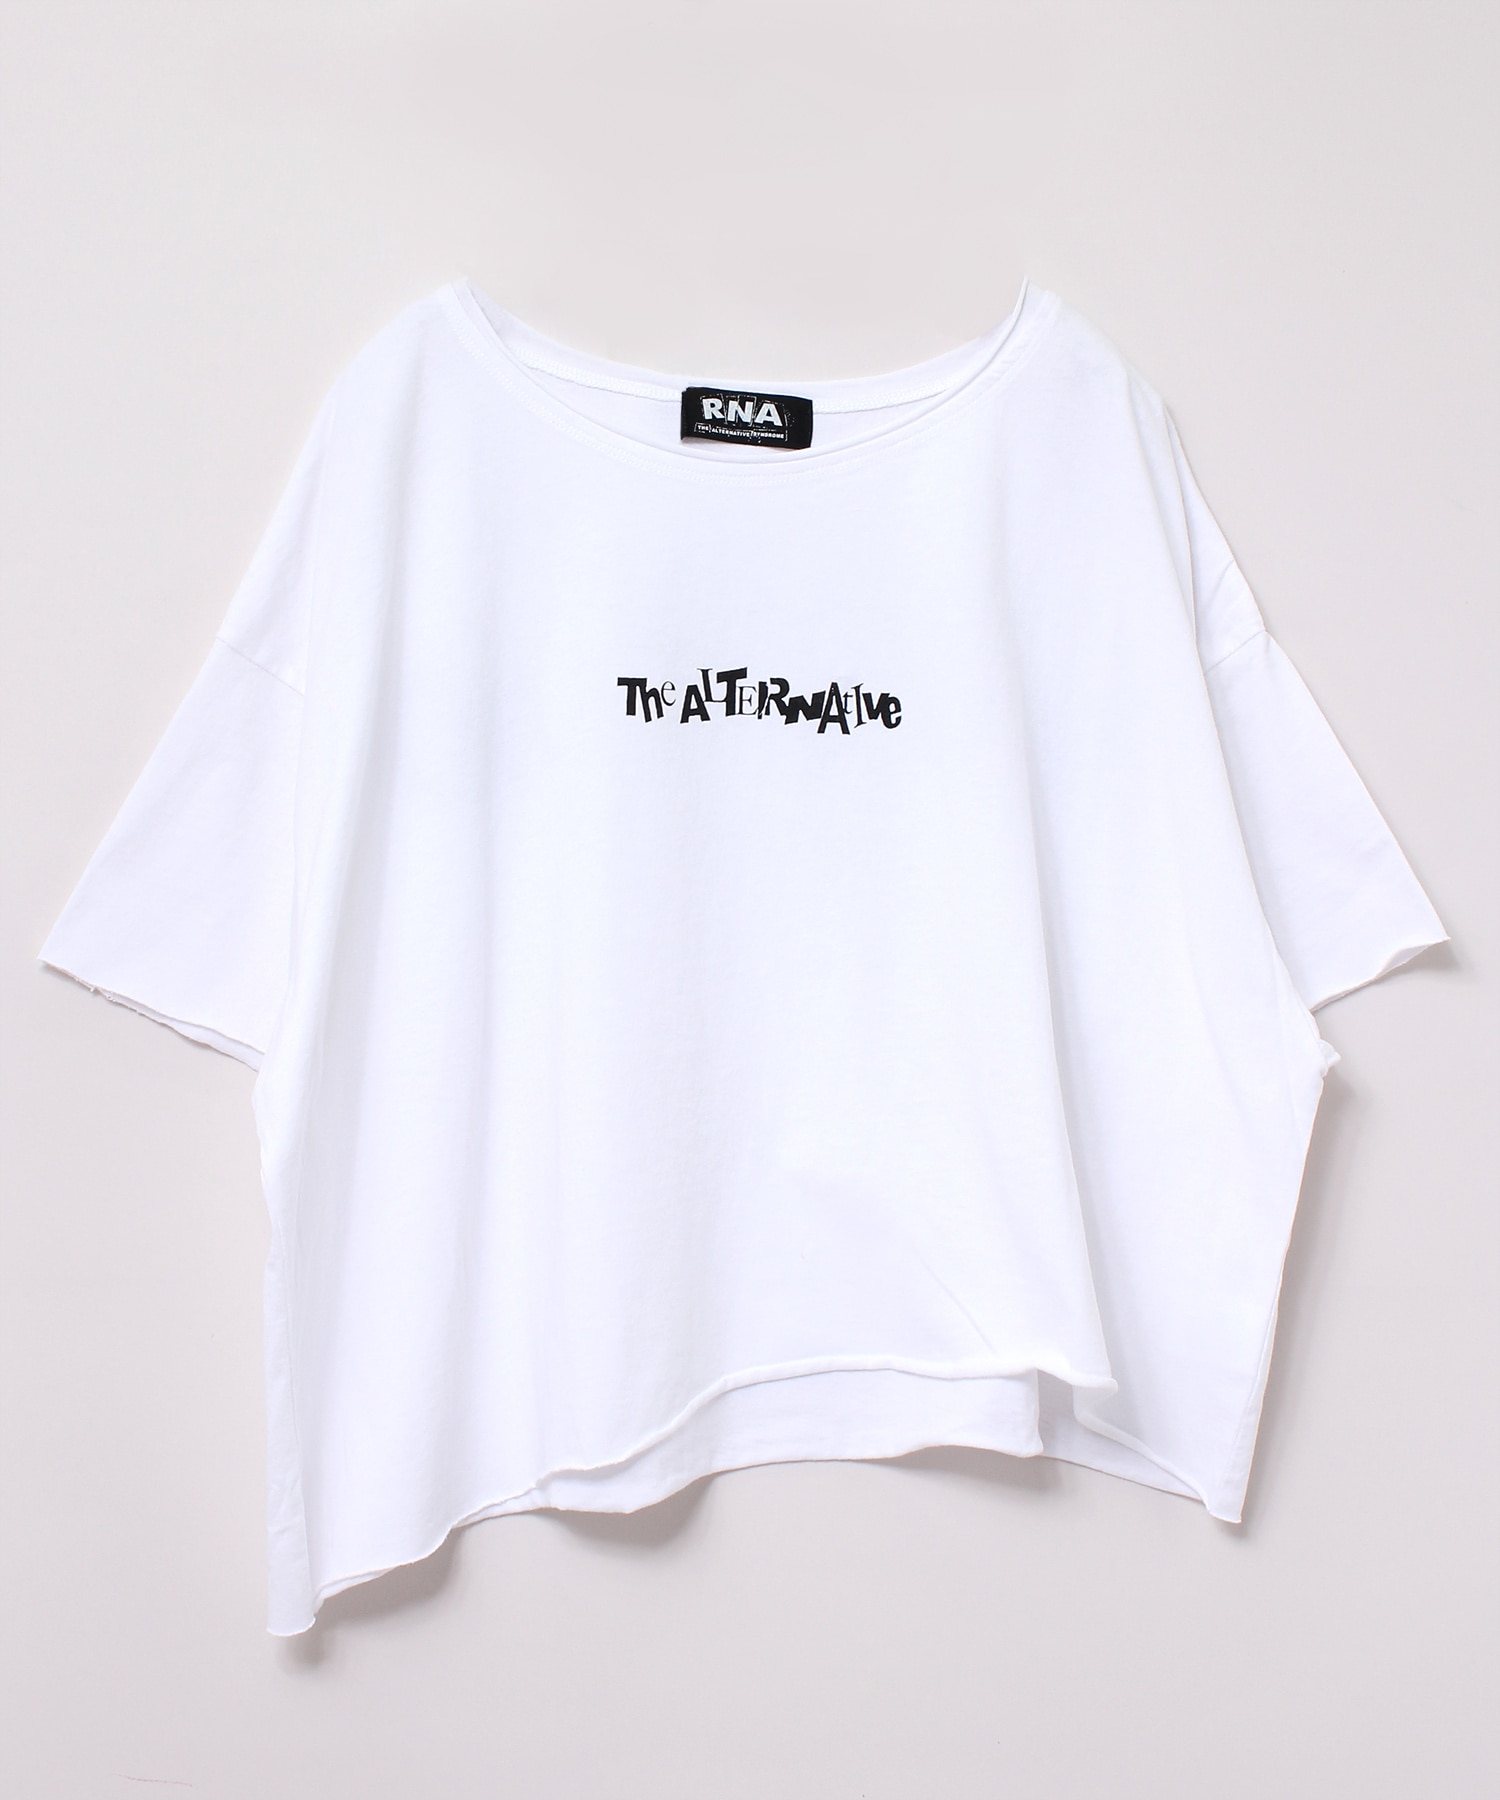 M1935 WITHSTANDカットオフTシャツ